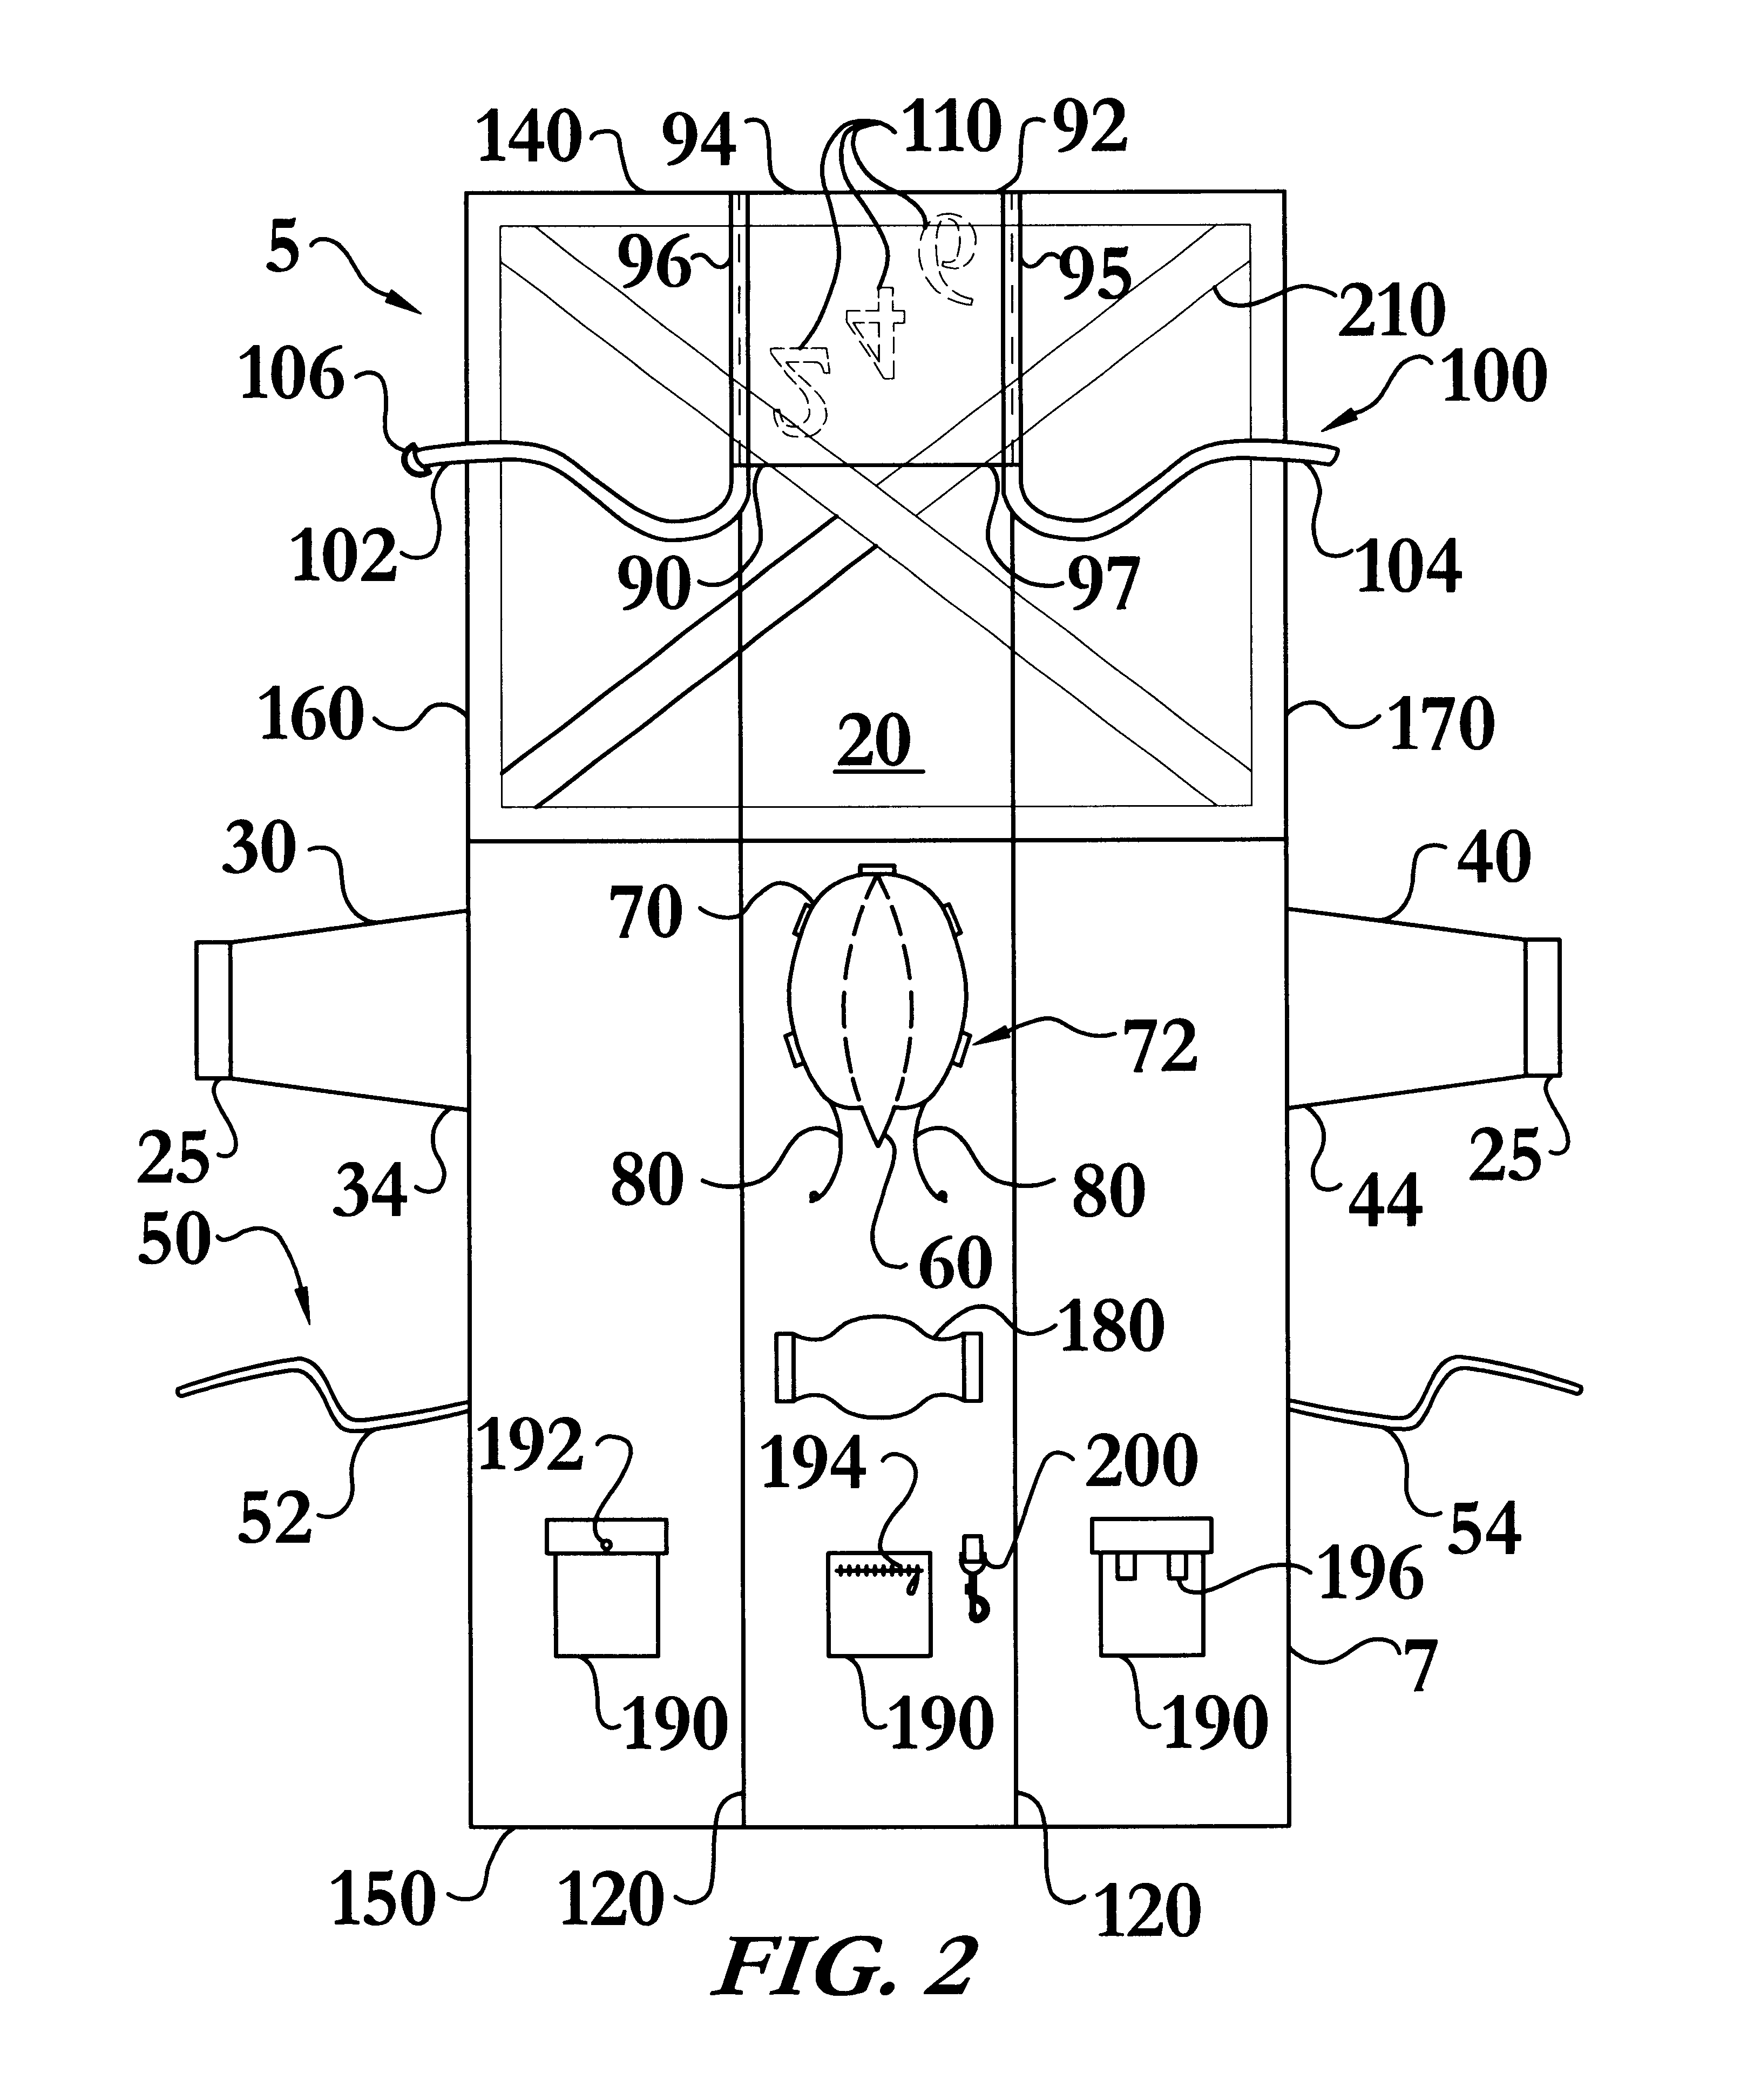 Combination cushion, carry device, and garment apparatus